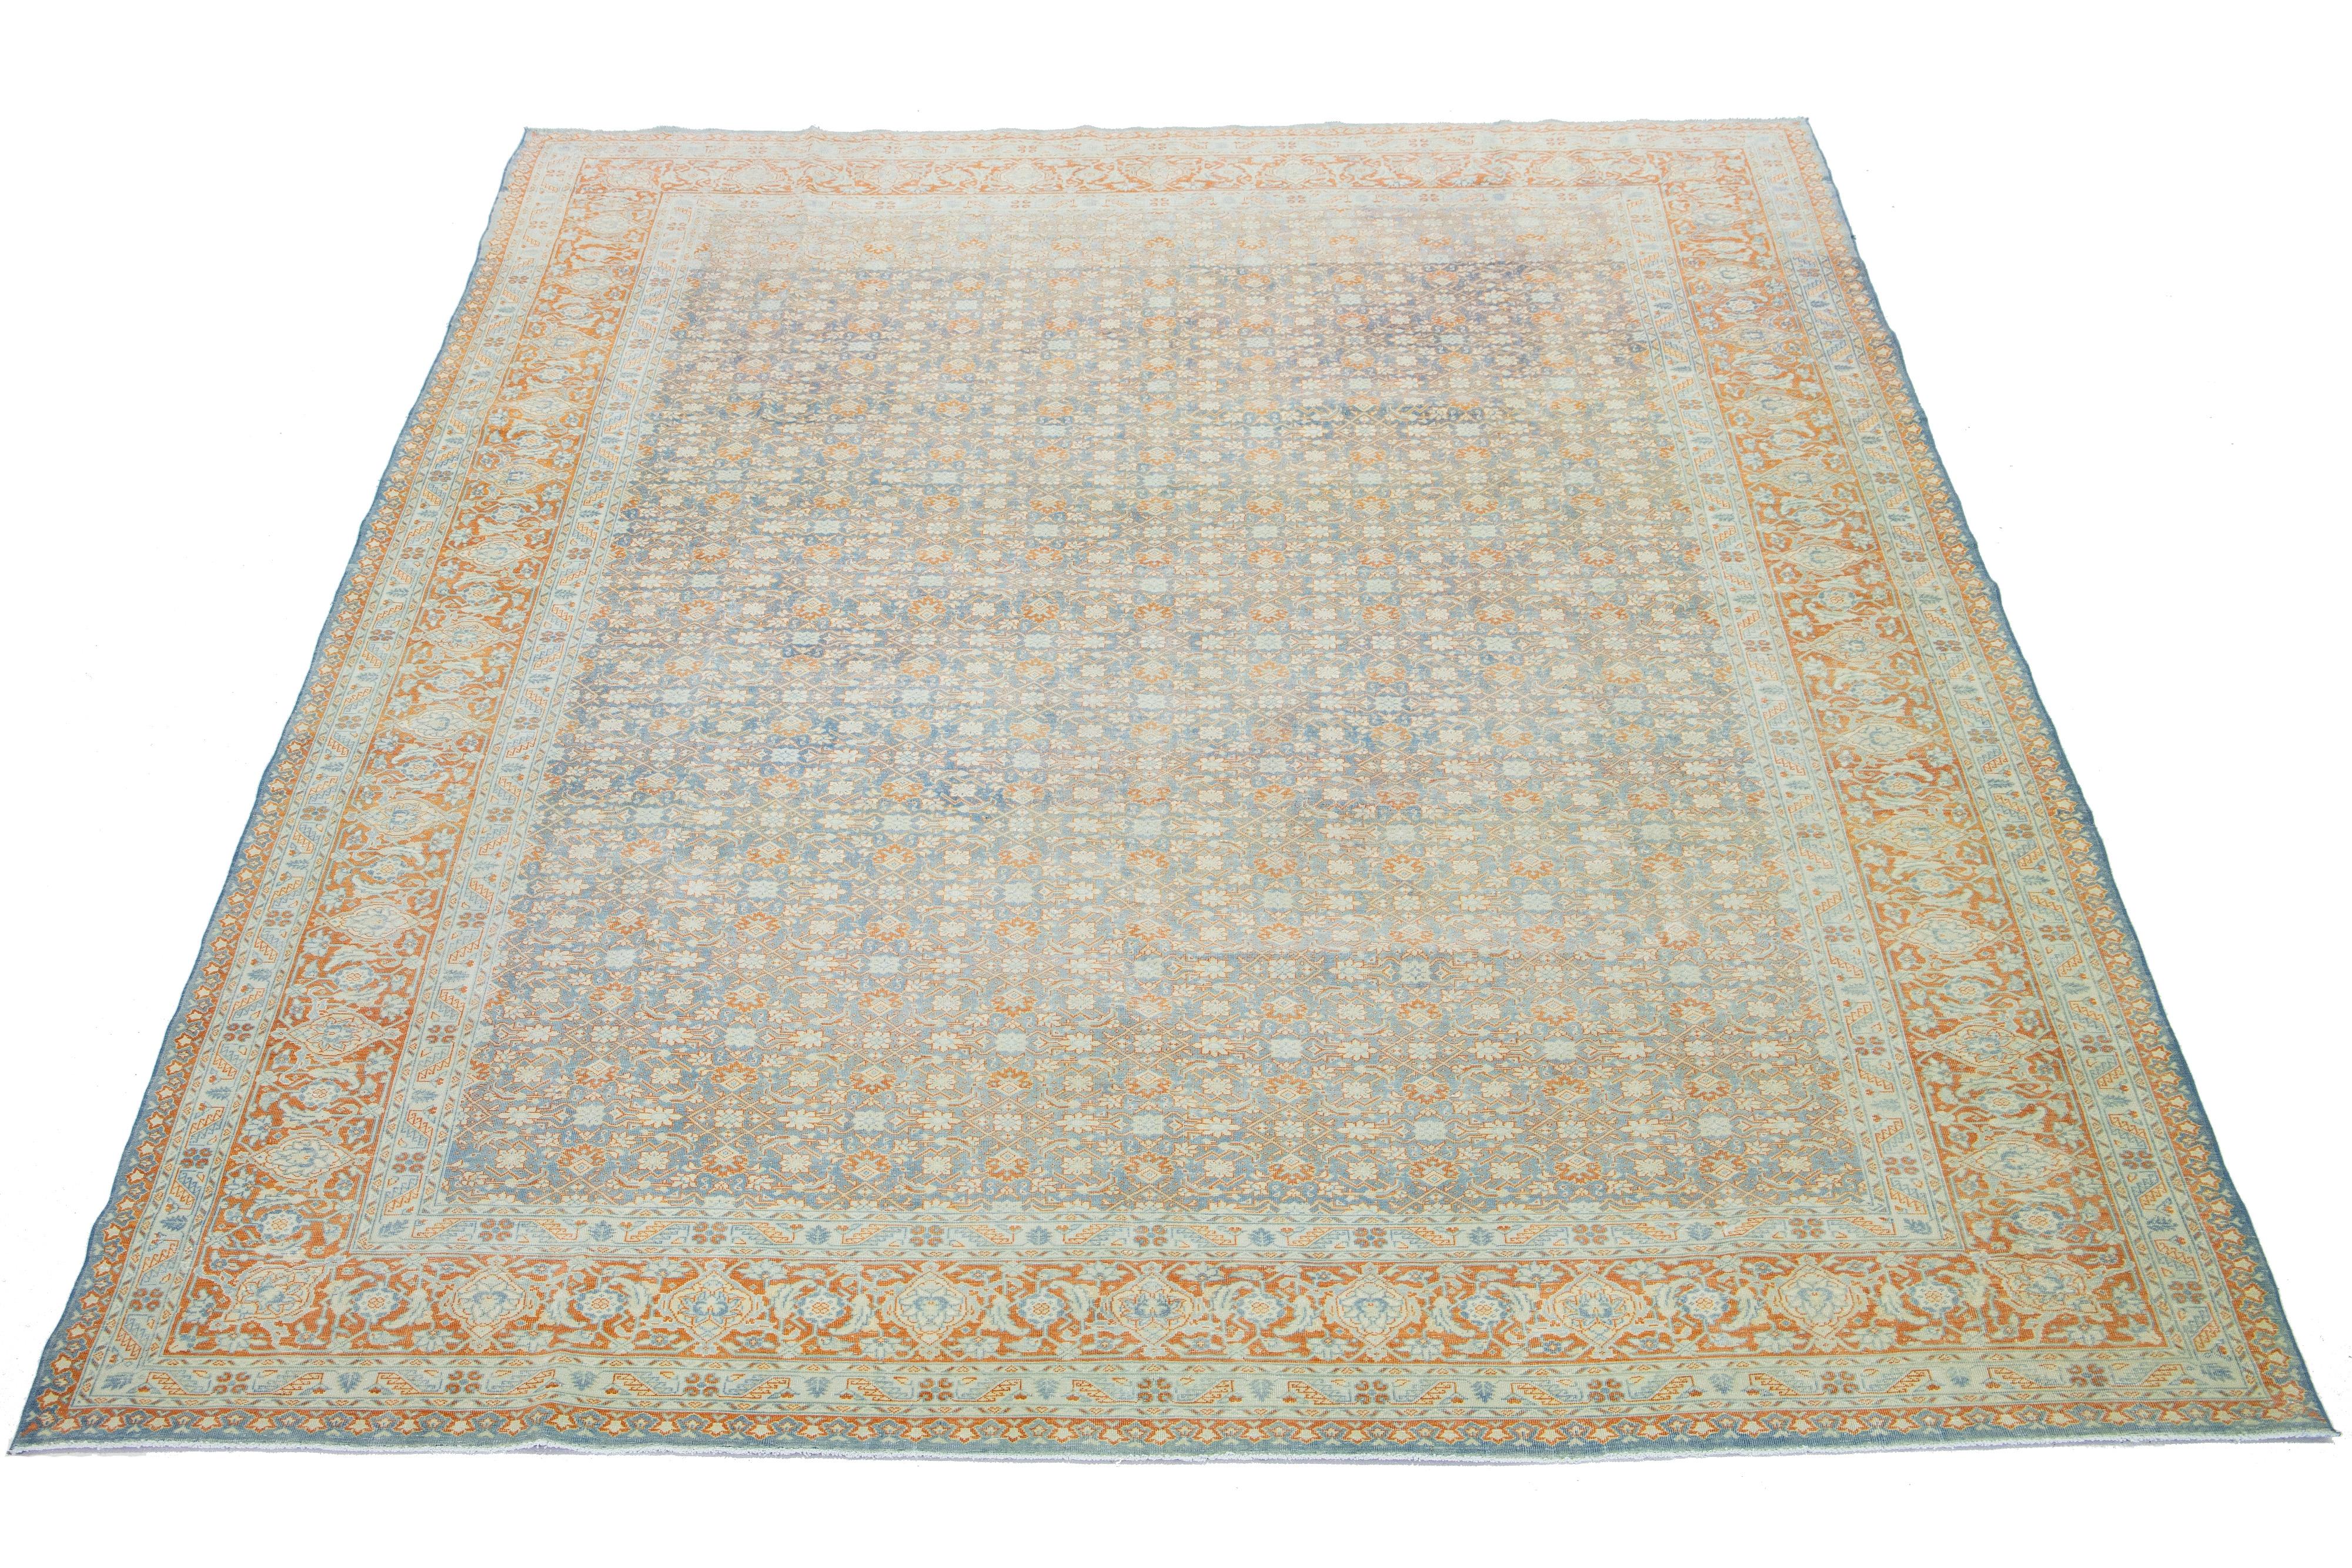 Made of hand-knotted wool, this Persian Malayer rug is an antique piece. It features a beautiful light blue field adorned with orange highlights, all arranged in a timeless classical pattern.

This rug measures 8'11